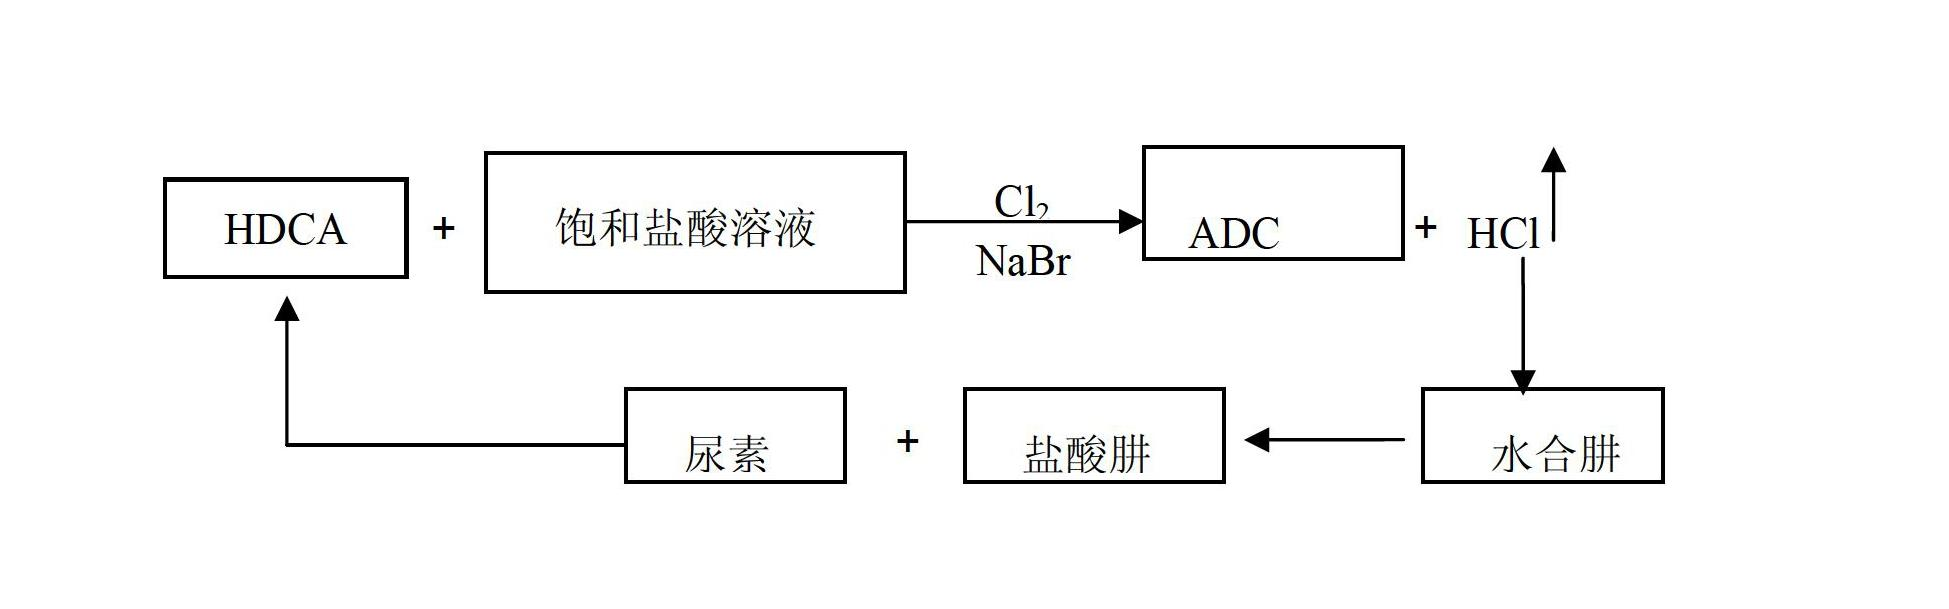 Method for producing ADC foaming agent by using chlorine gas-oxidized HDCA (biurea) in saturated hydrochloric acid solution